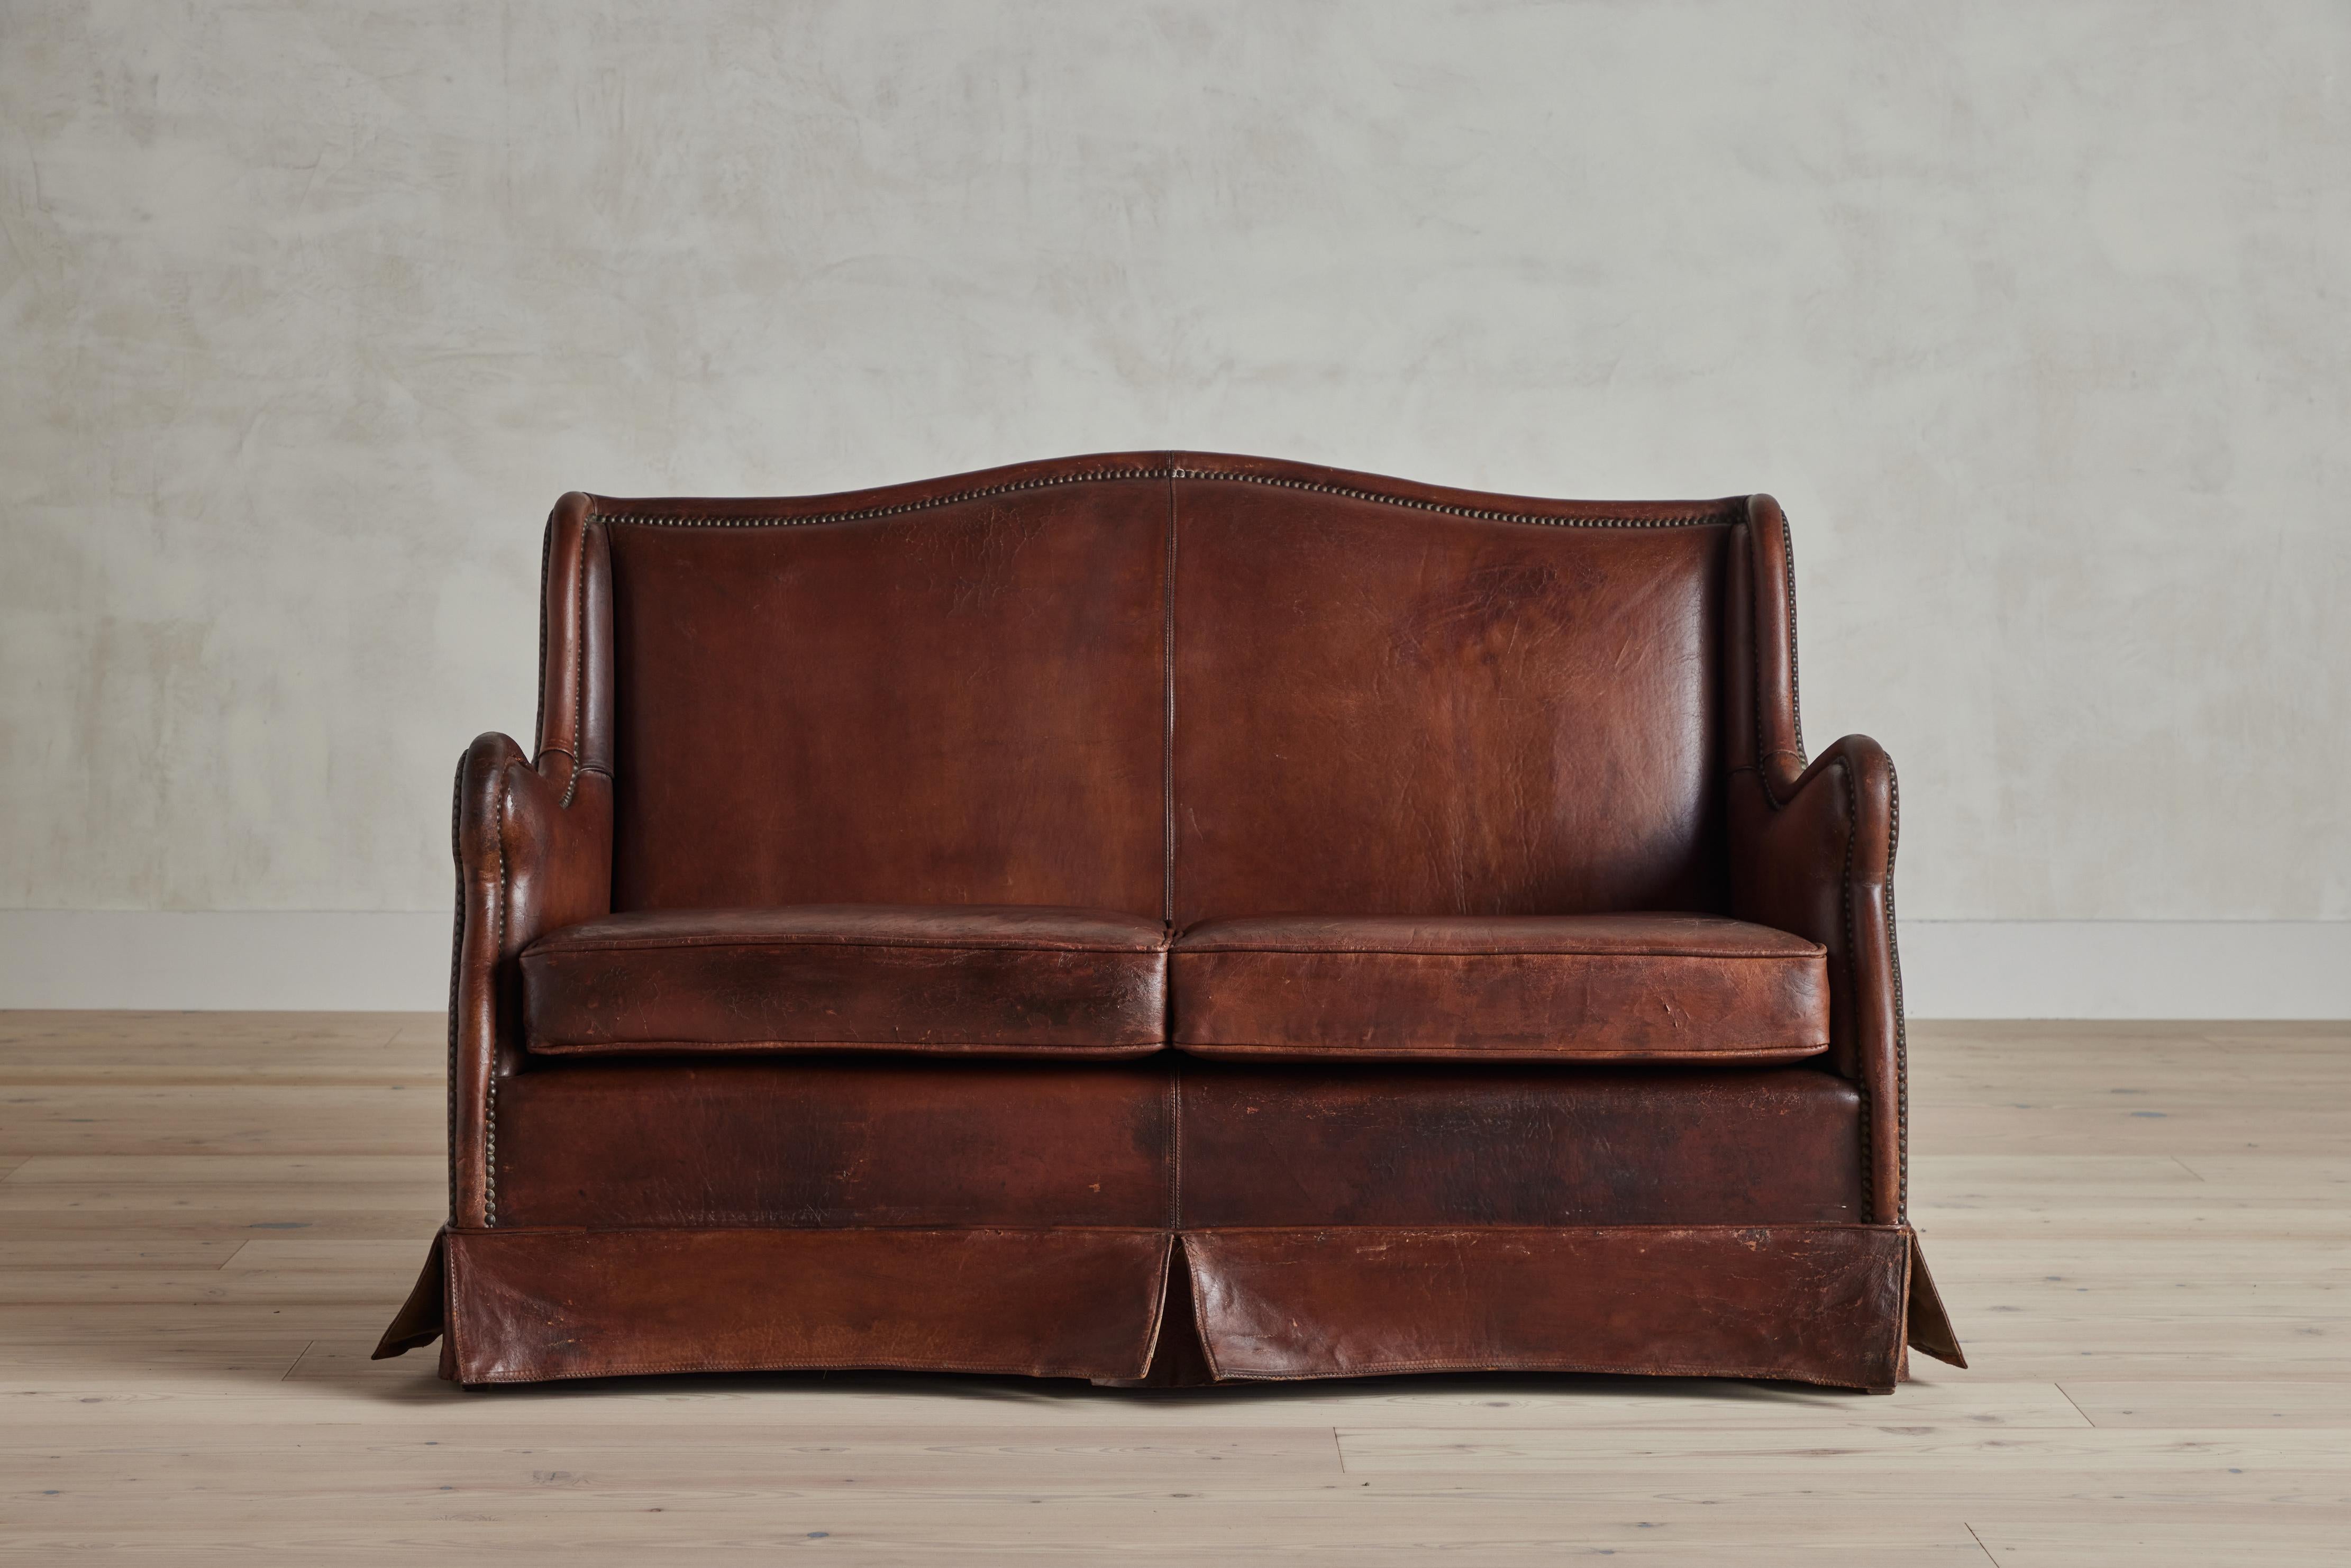 Leather settee from France circa 1930.

Dimensions: 51